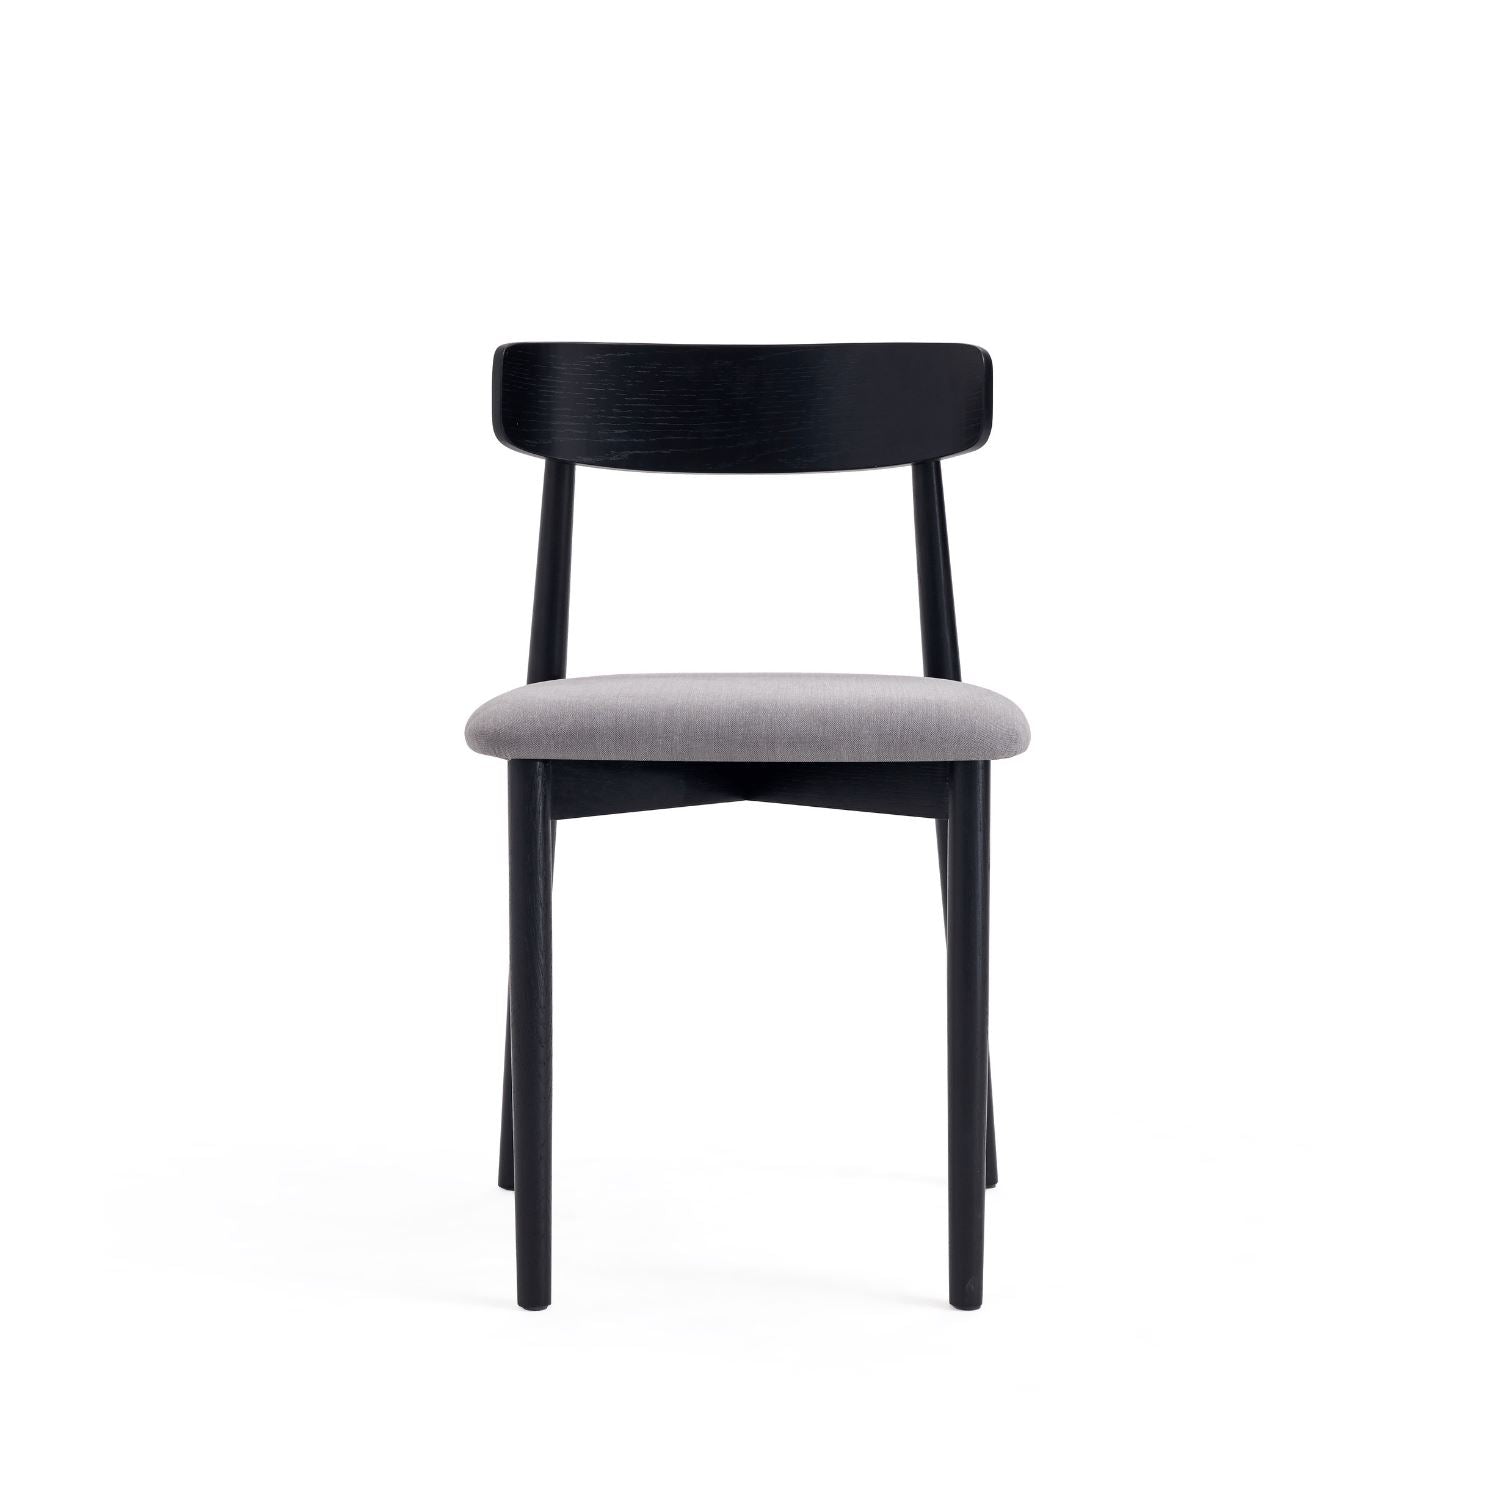 Valque Chair - Set of 2 - Valyou 